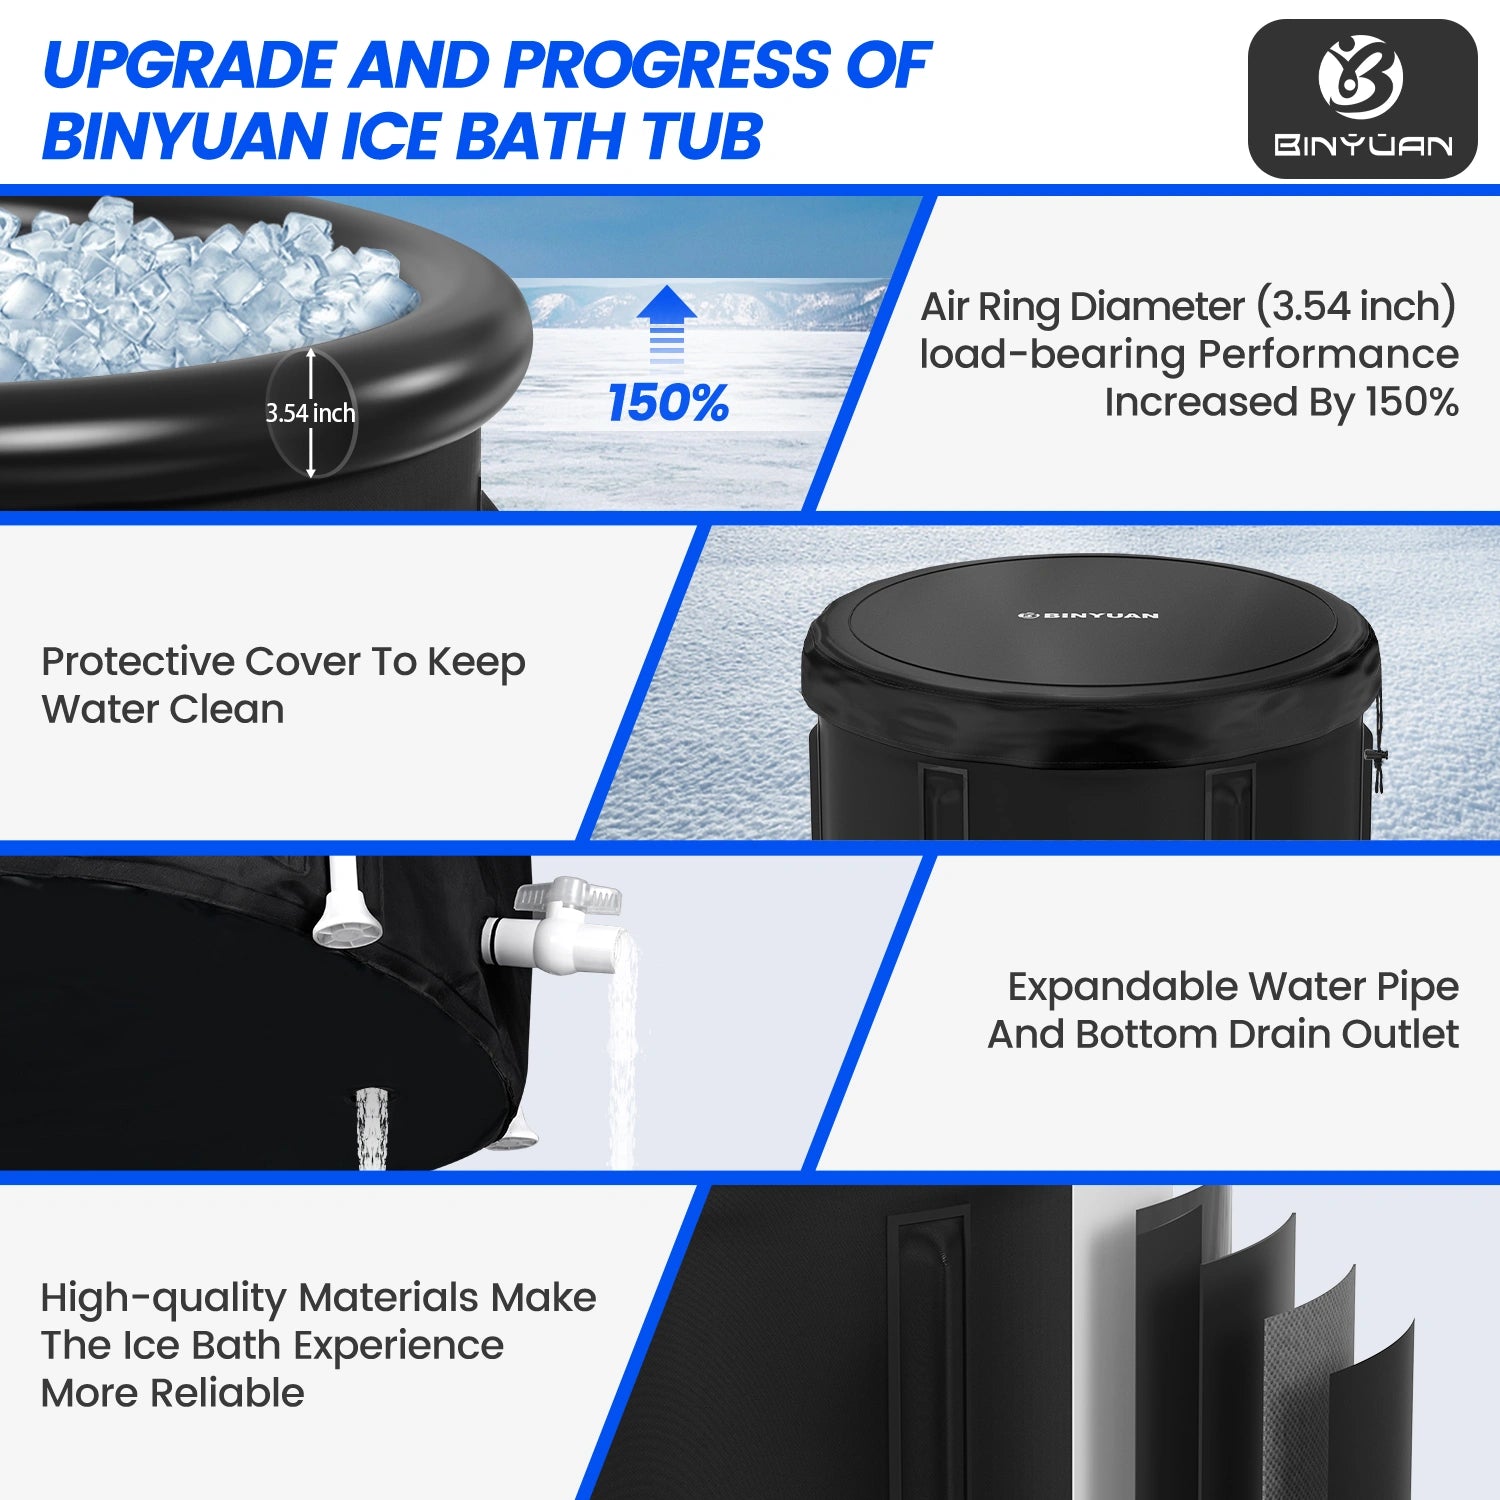 Upgraded ice bath tub with enhanced load-bearing air ring, protective cover, expandable water pipe, and high-quality materials for a reliable experience.